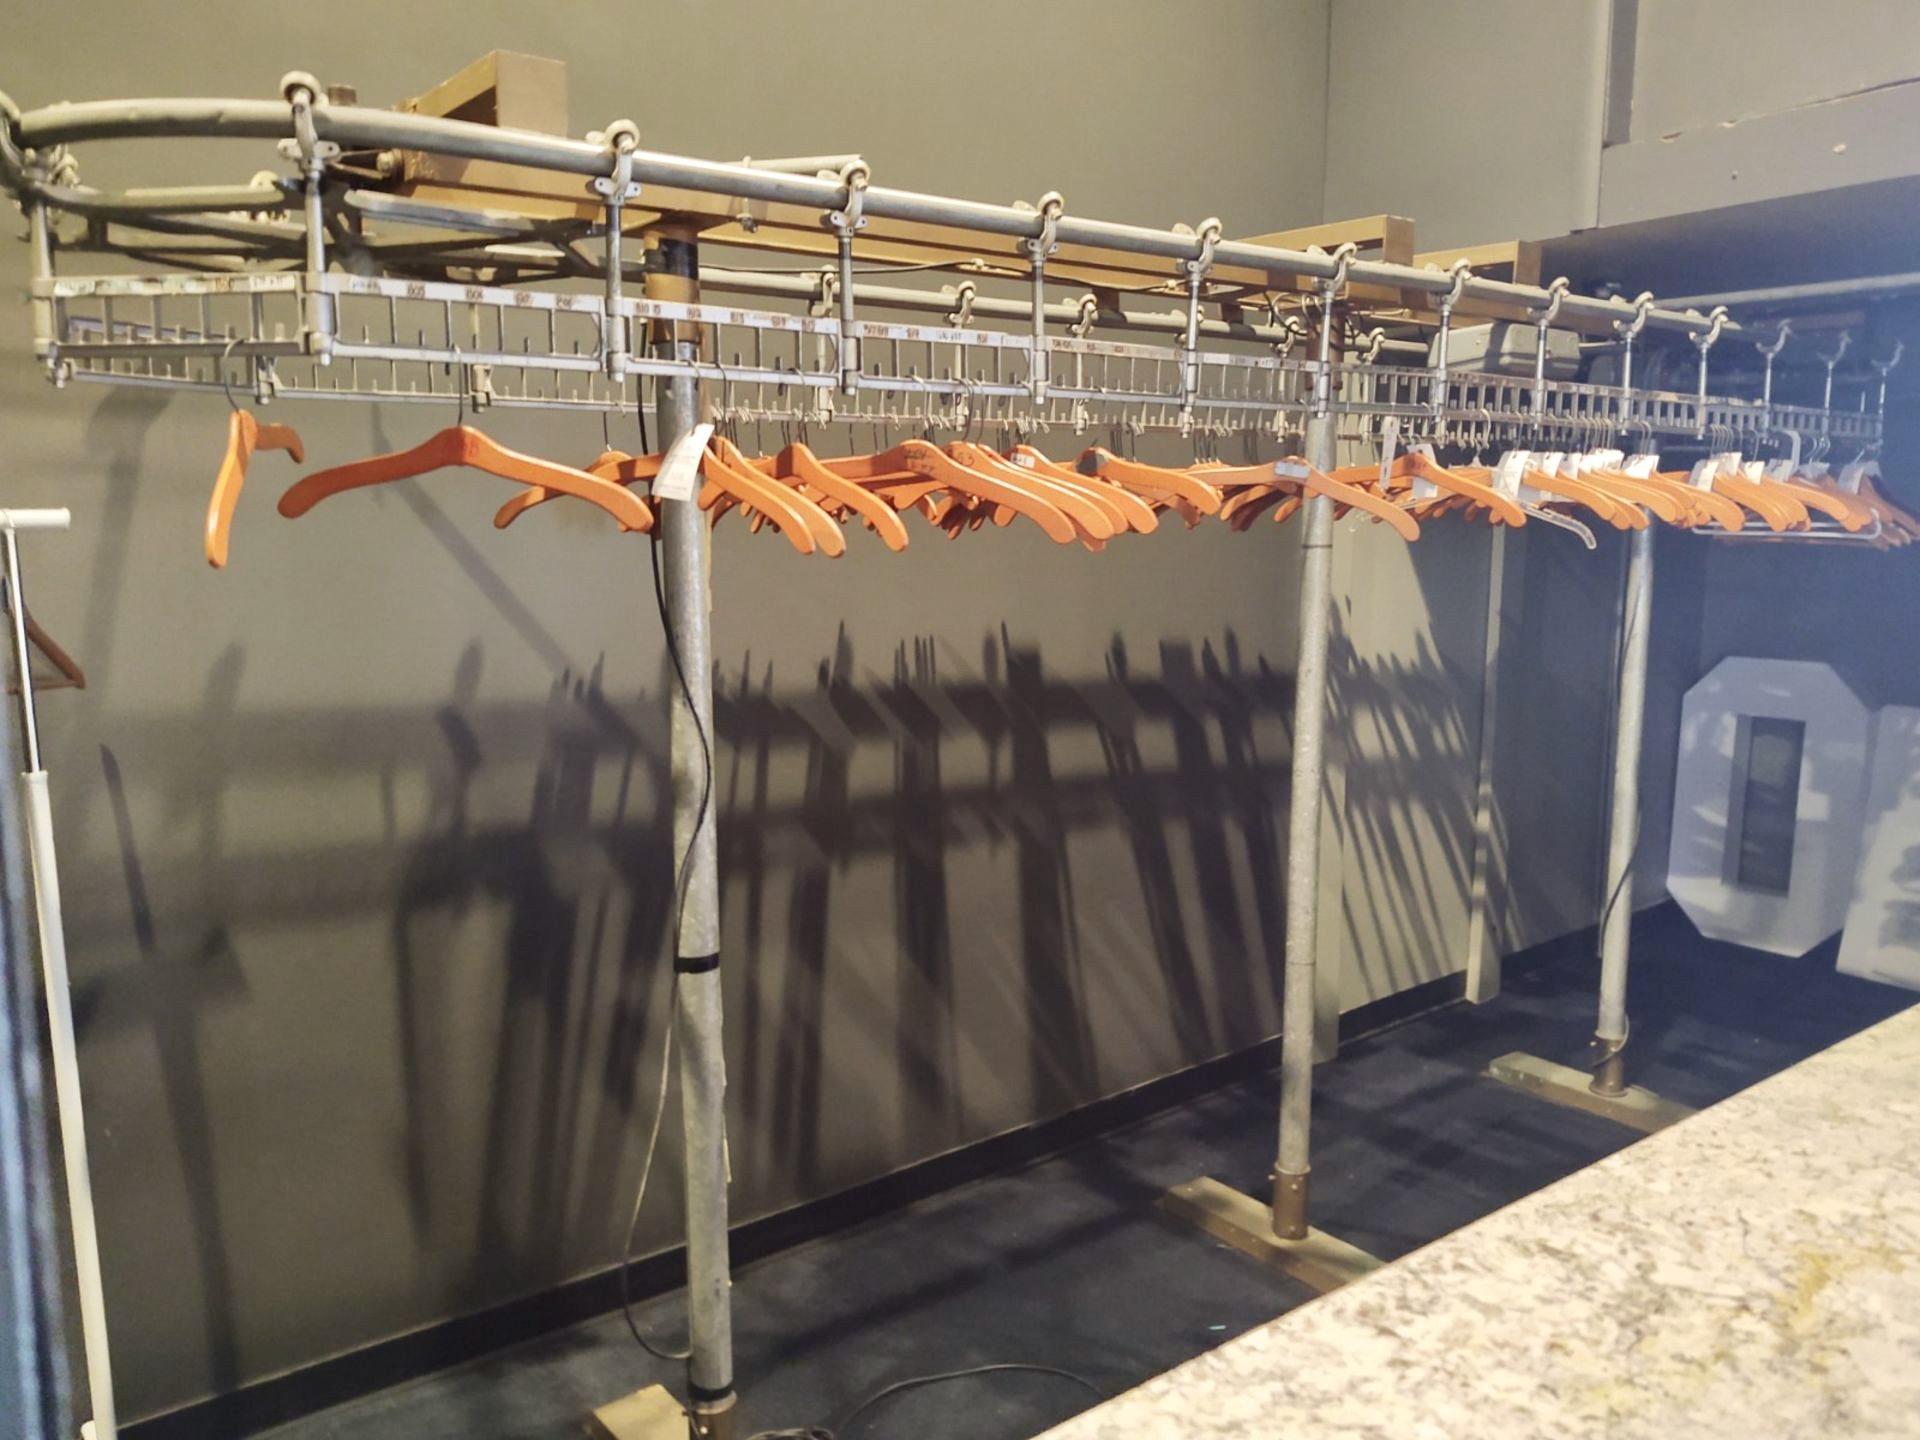 For the ultimate walk-in-closet or dressing room we have this Made in USA Stor-U-Veyor automatic garment conveyor for up to 300 hangers powered by a Westinghouse Thermoguard motor serial no. 3128625.
Produced by White Conveyors, White Manufacturing